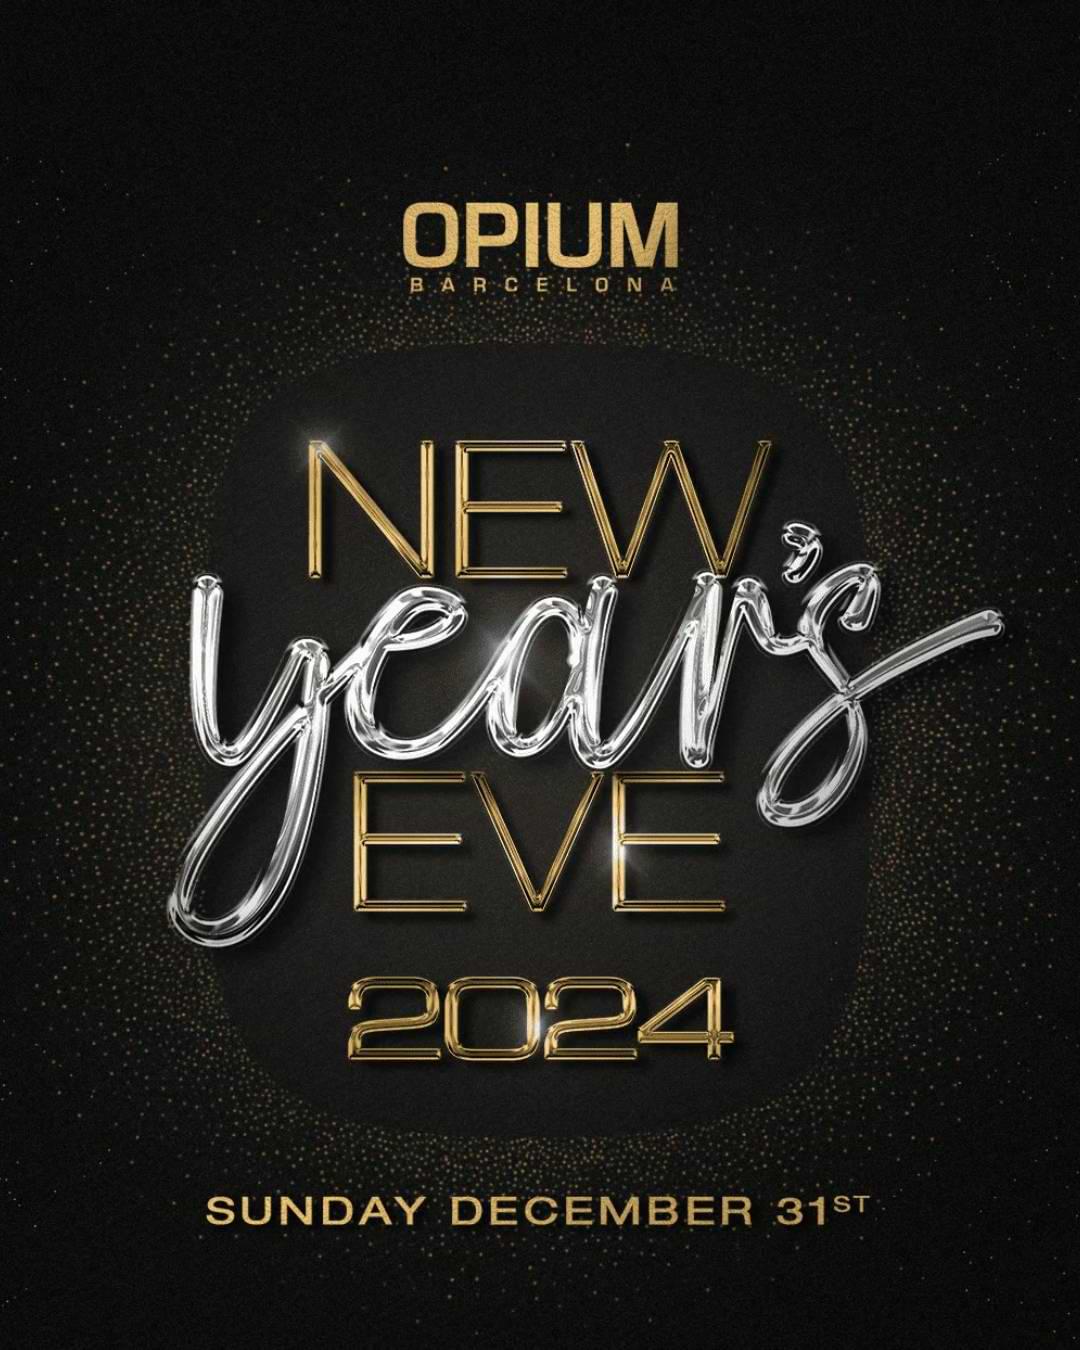 opium barcelona new year's end